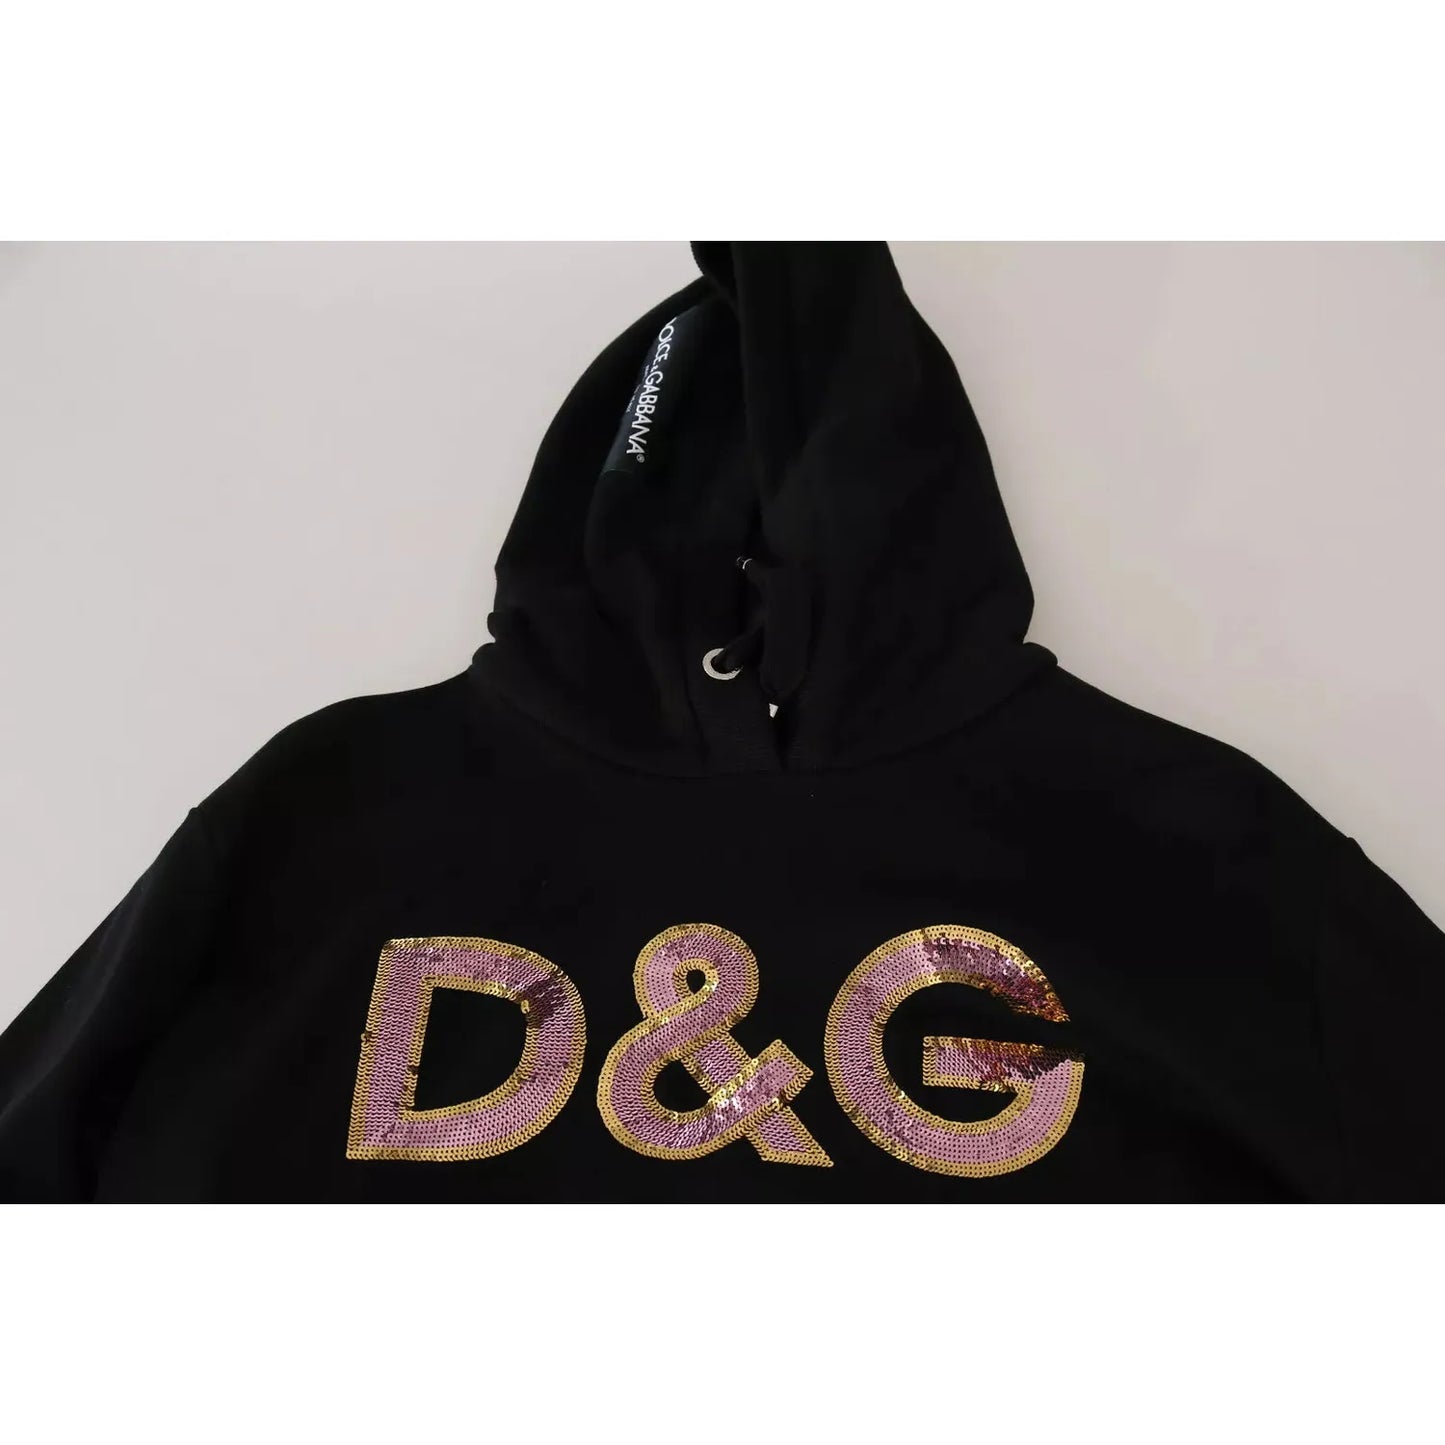 Dolce & Gabbana DG Sequined Hooded Pullover Sweater dg-sequined-hooded-pullover-sweater